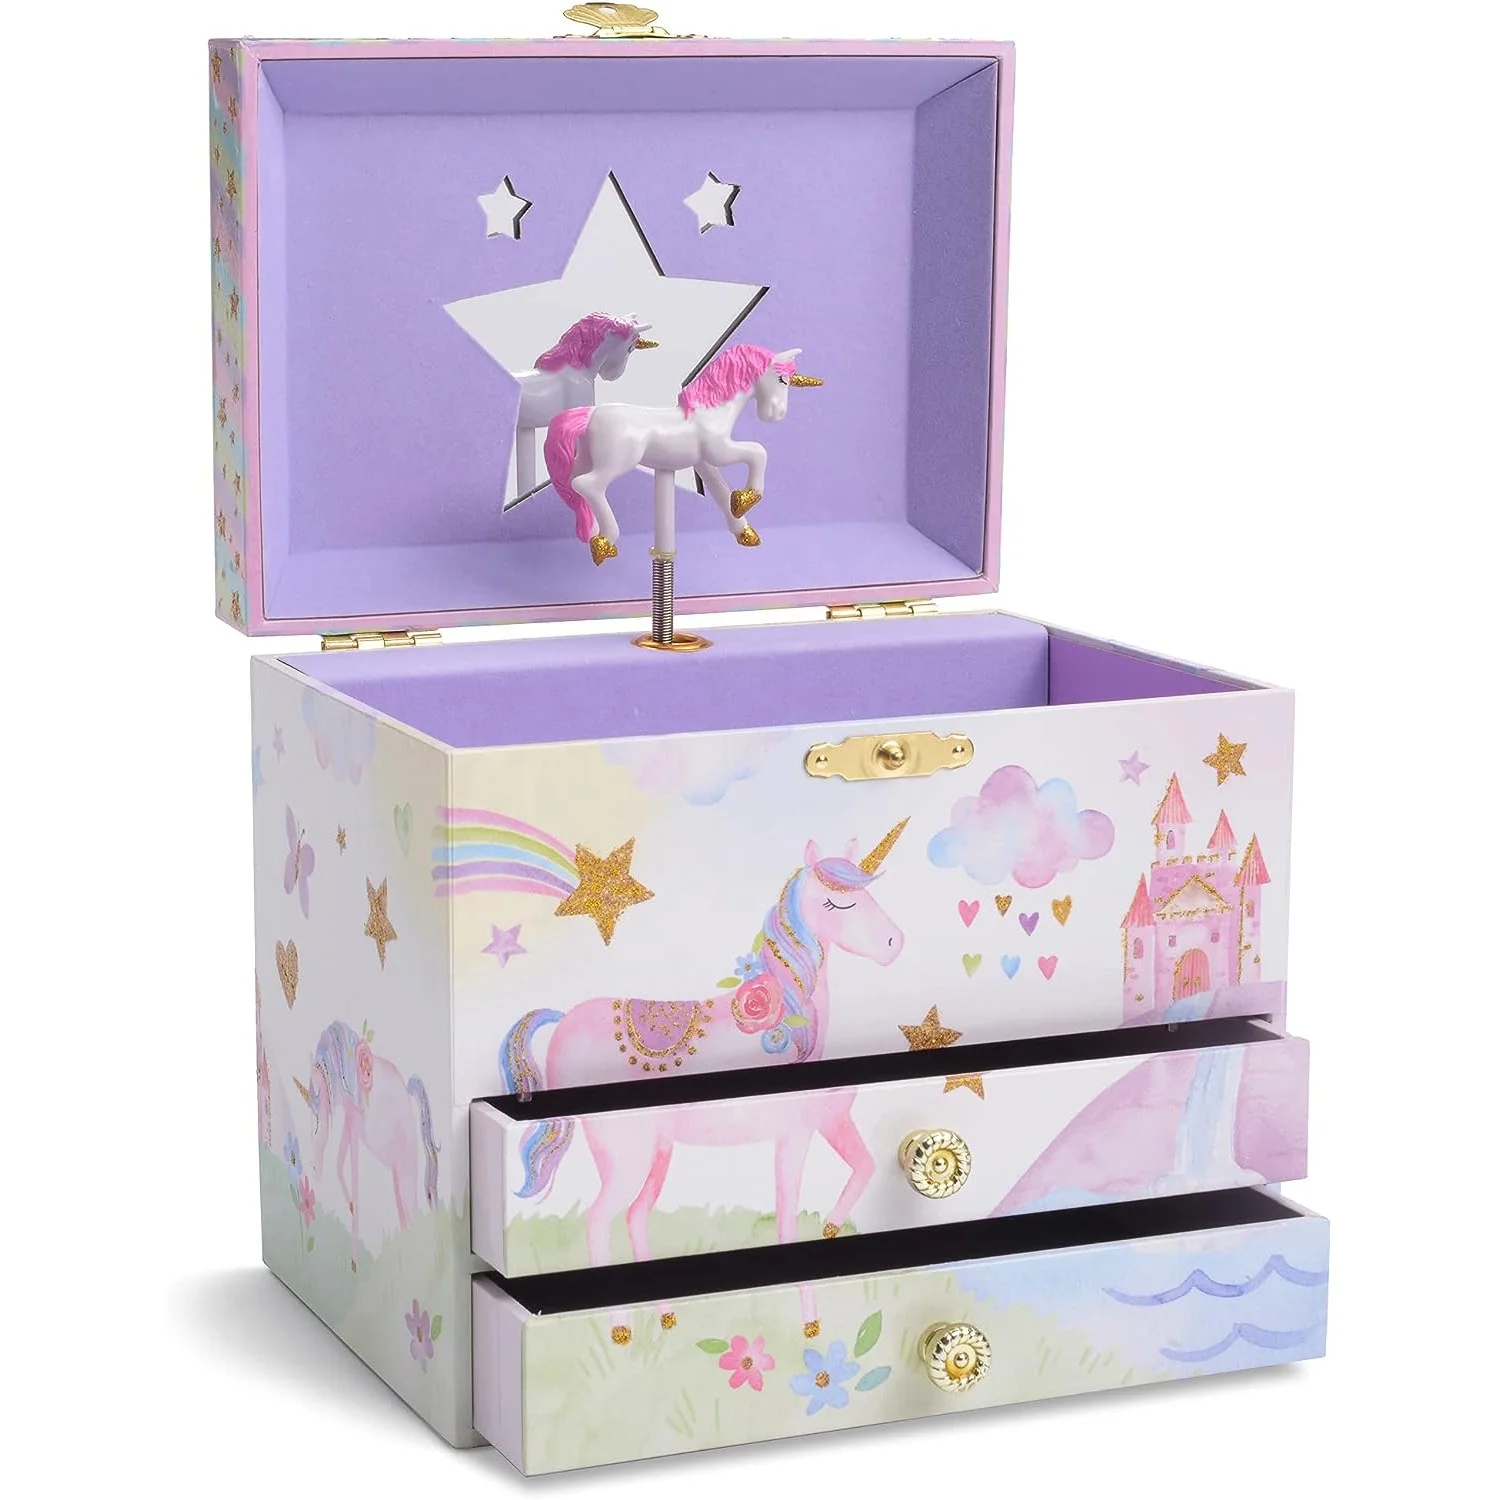 Ever Bright High Quality Promotional Gift Unicorn Little Queen Dancing Ballerina Wooden Jewelry Music Box With 2 Drawers